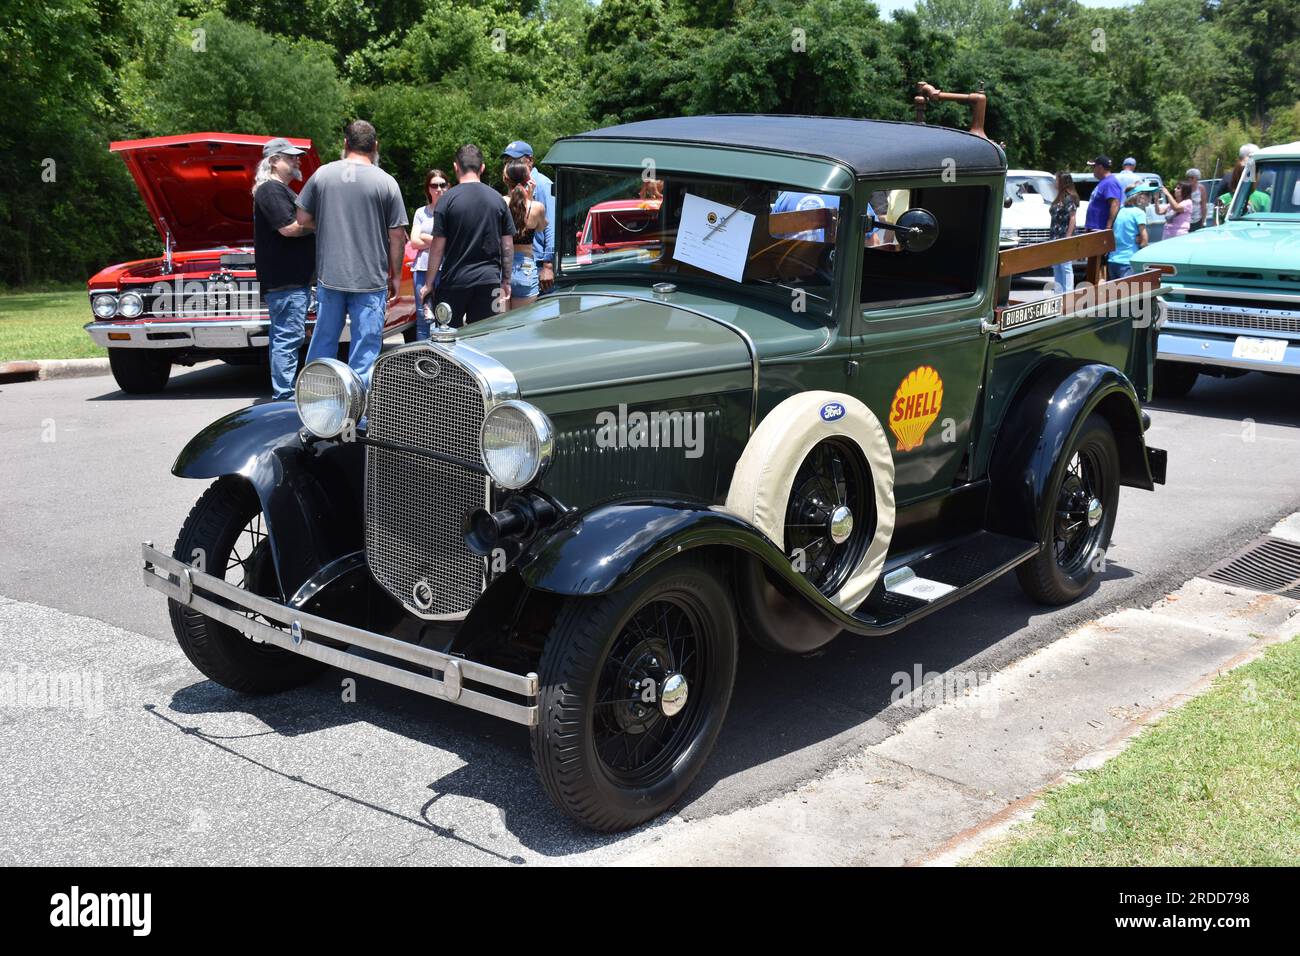 A 1931 Ford Model A Pickup Truck on display a car show. Stock Photo